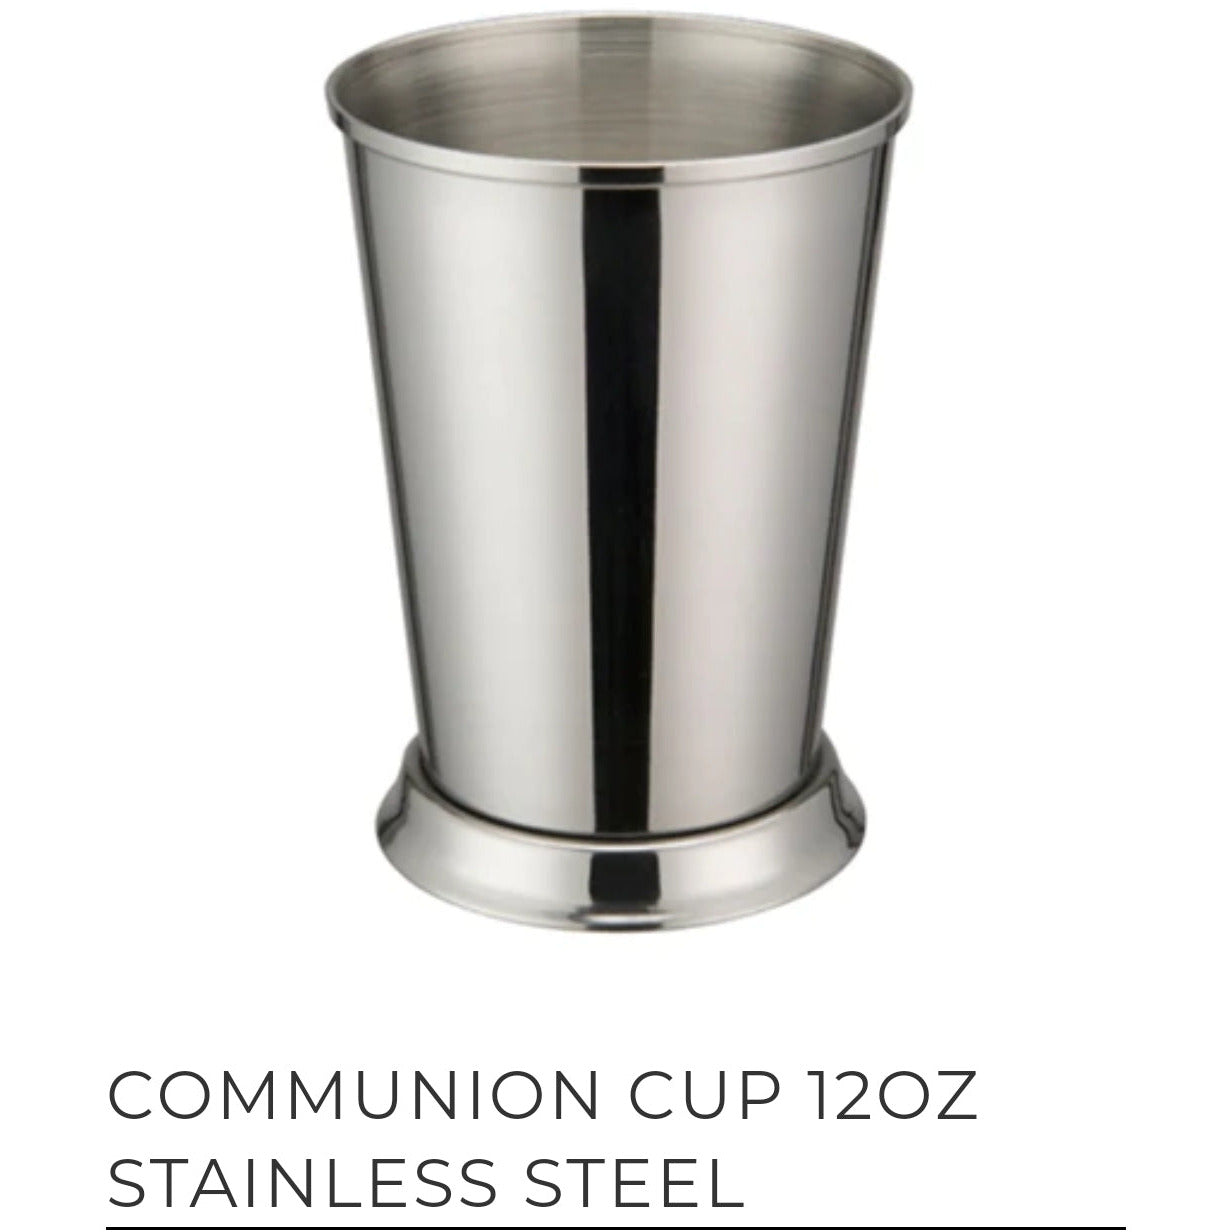 Communion Cup, 12 oz. Stainless Steel